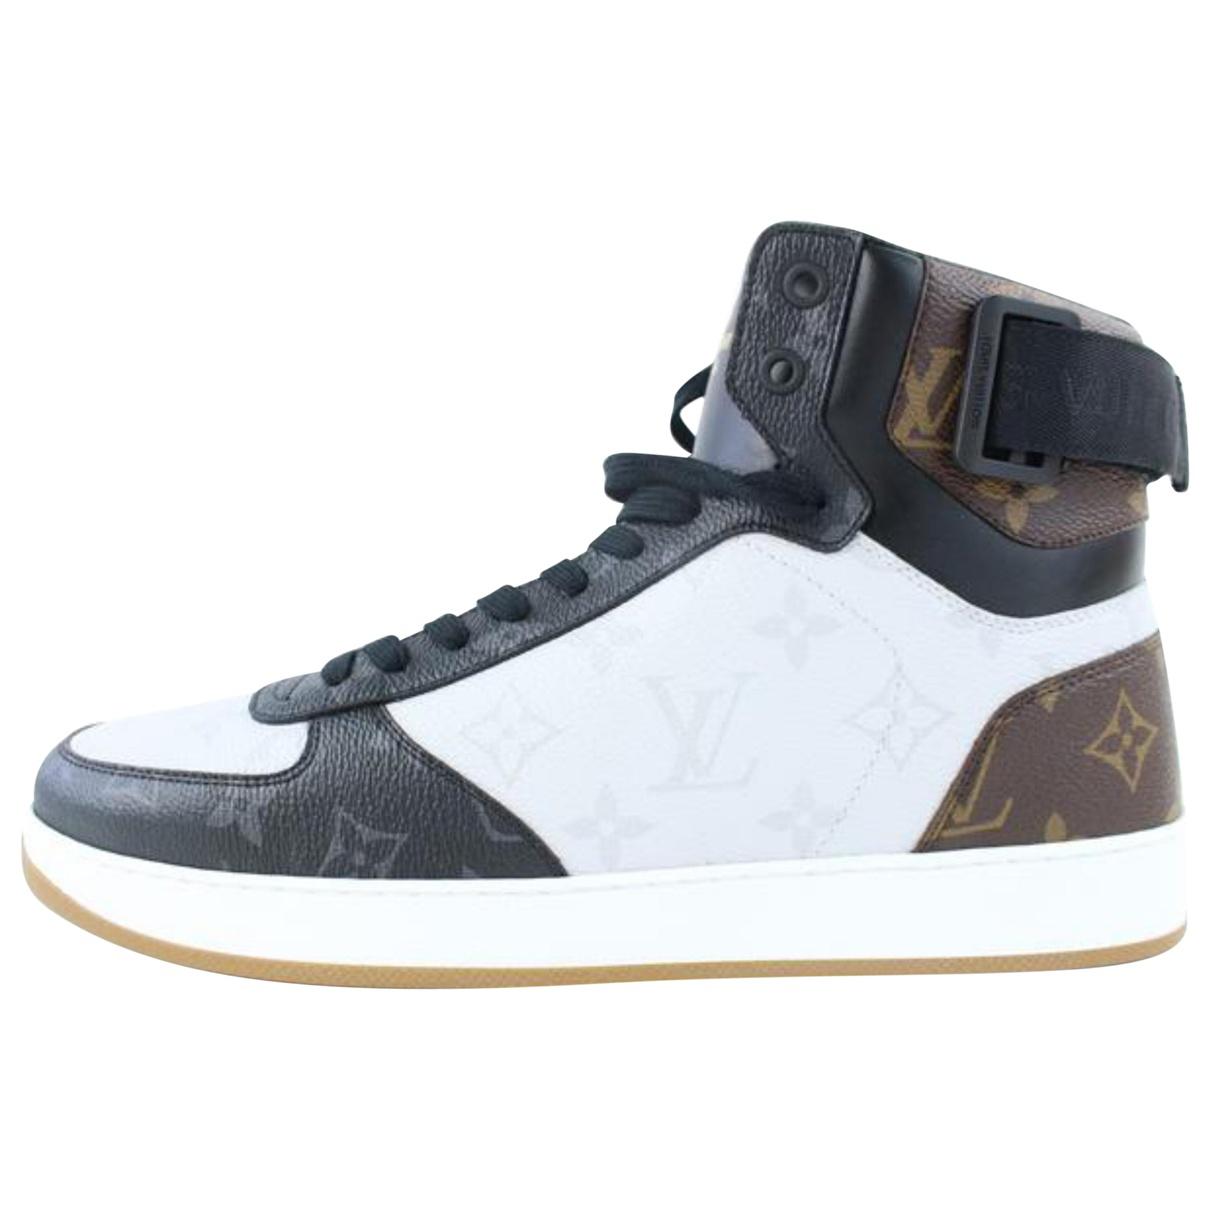 Louis Vuitton Leather High Trainers in Blue for Men - Lyst